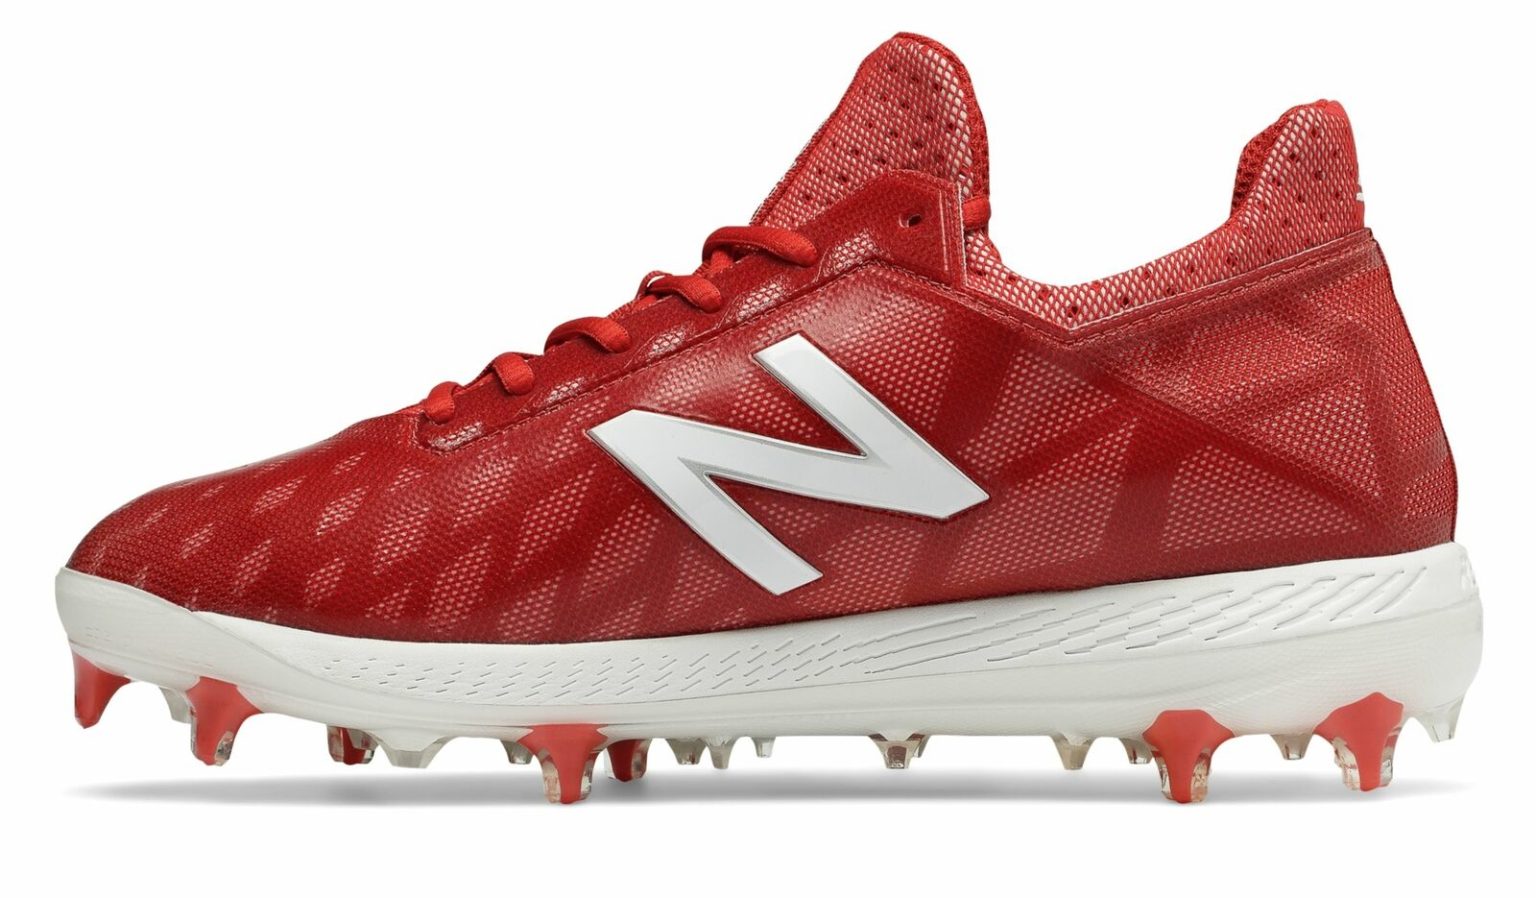 New Balance LowCut COMPv1 TPU Baseball Cleat 'Red' Style COMPTR1